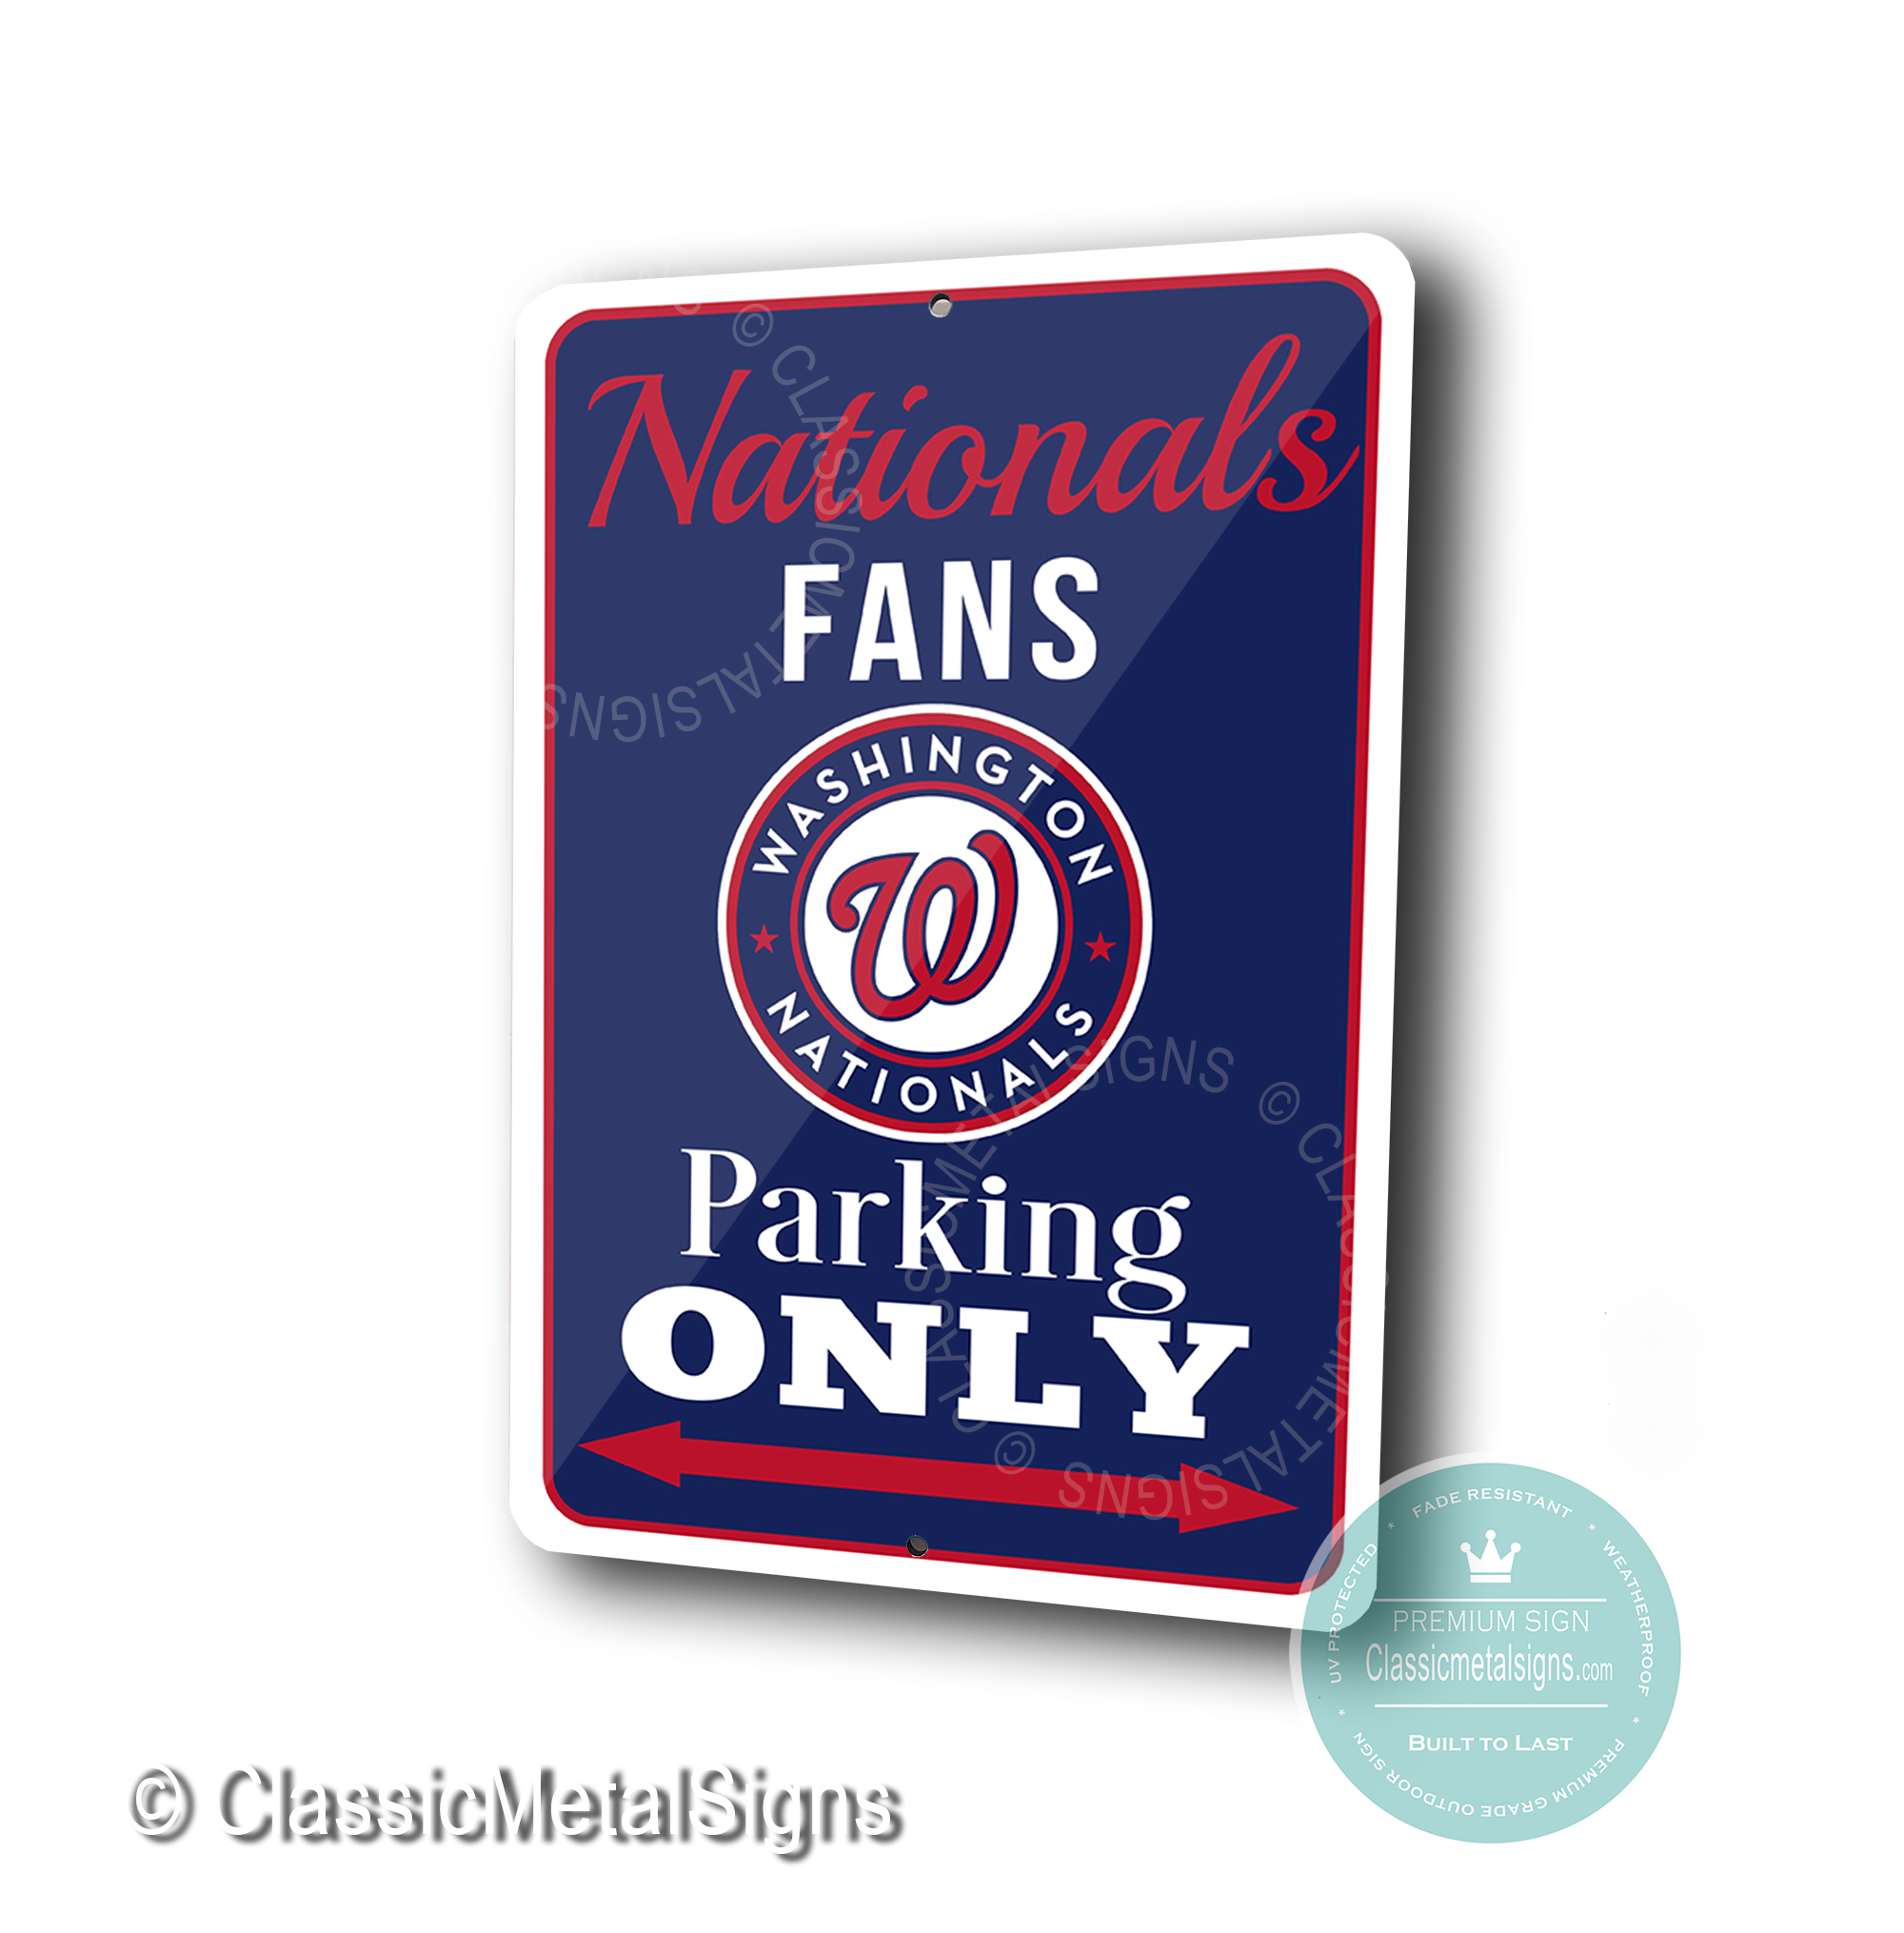 Washington Nationals Parking Only signs